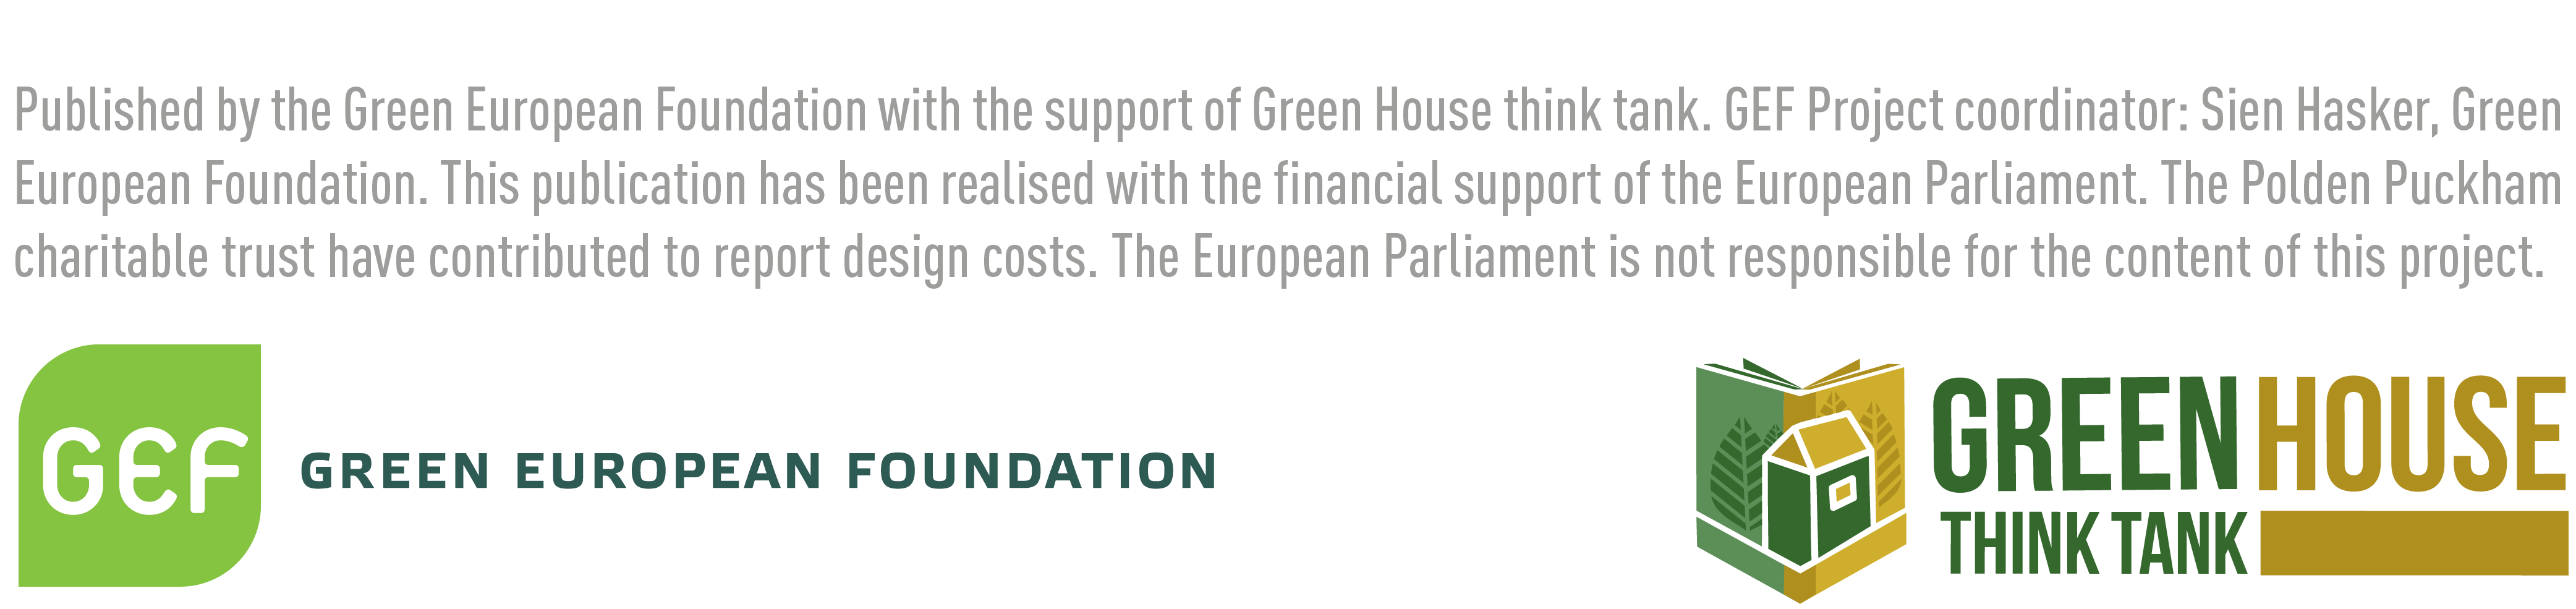 Images of the logos of the Green European Foundation and Green House Think Tank with text which reads Published by the Green European Foundation with the support of Green House think tank. GEF project coordinator: Sian Hasker, Green European Foundation. This publication has been realised with financial support of the European parliament. The Polden Puckham charitable trust have contributed to the report design costs. The European Parliament is not responsible for the content of this project.